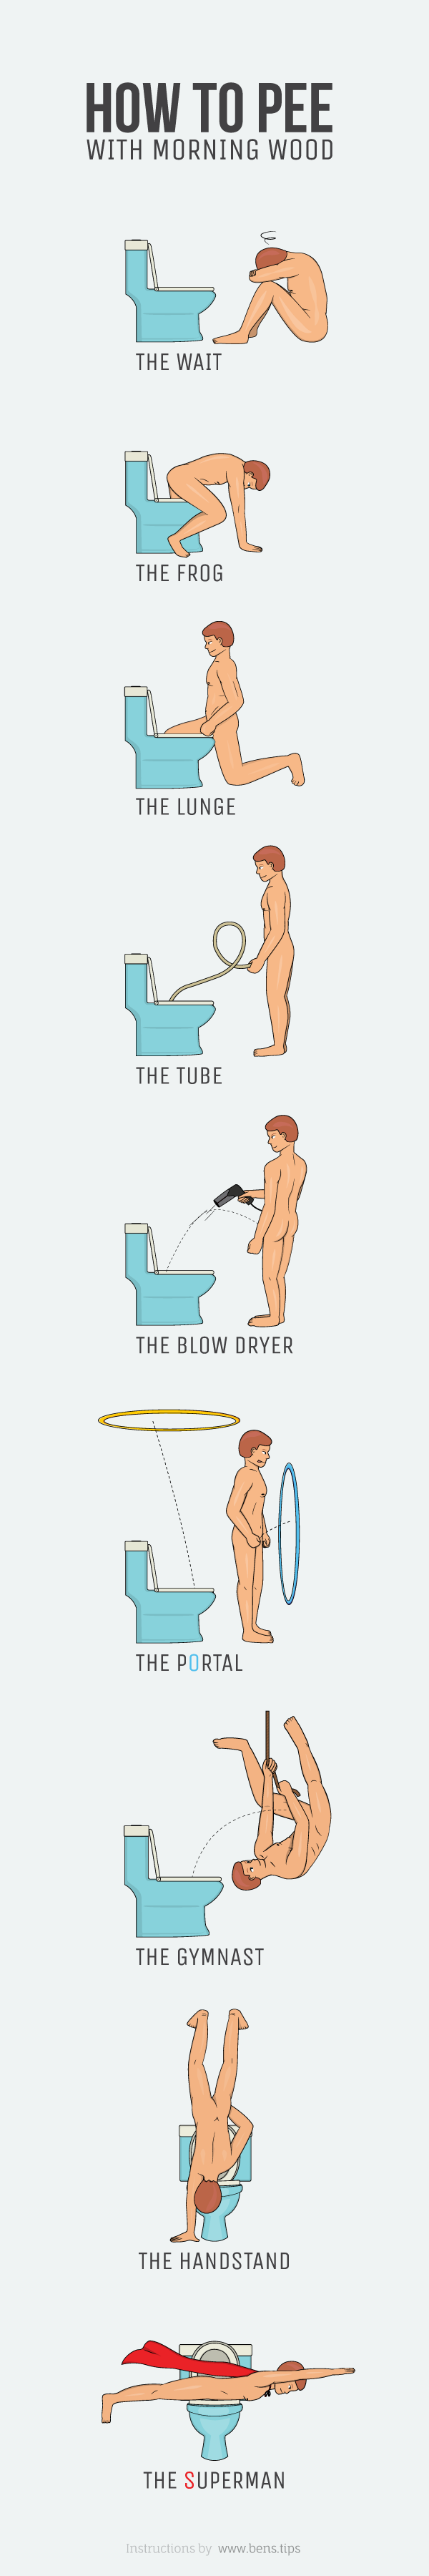 pee with morning wood - How To Pee With Morning Wood The Wait The Frog The Lunge The Tube The Blow Dryer The Portal The Gymnast The Handstand The Superman Instructions by